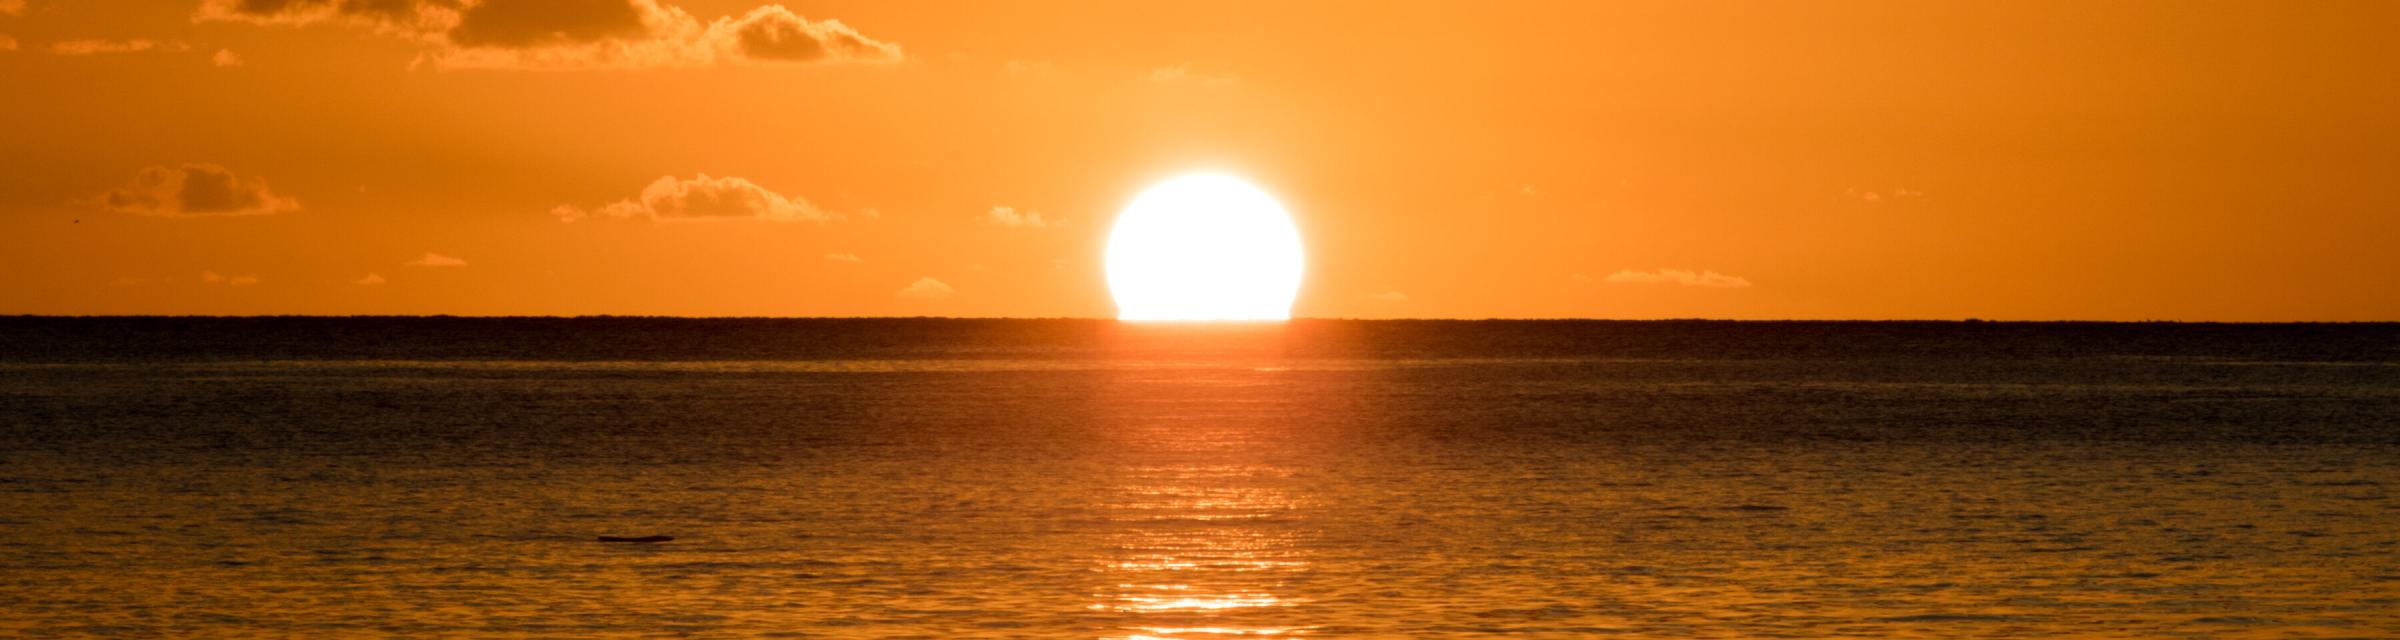 Kingstown, St. Vincent and Grenadines :: Sunset over the sea.